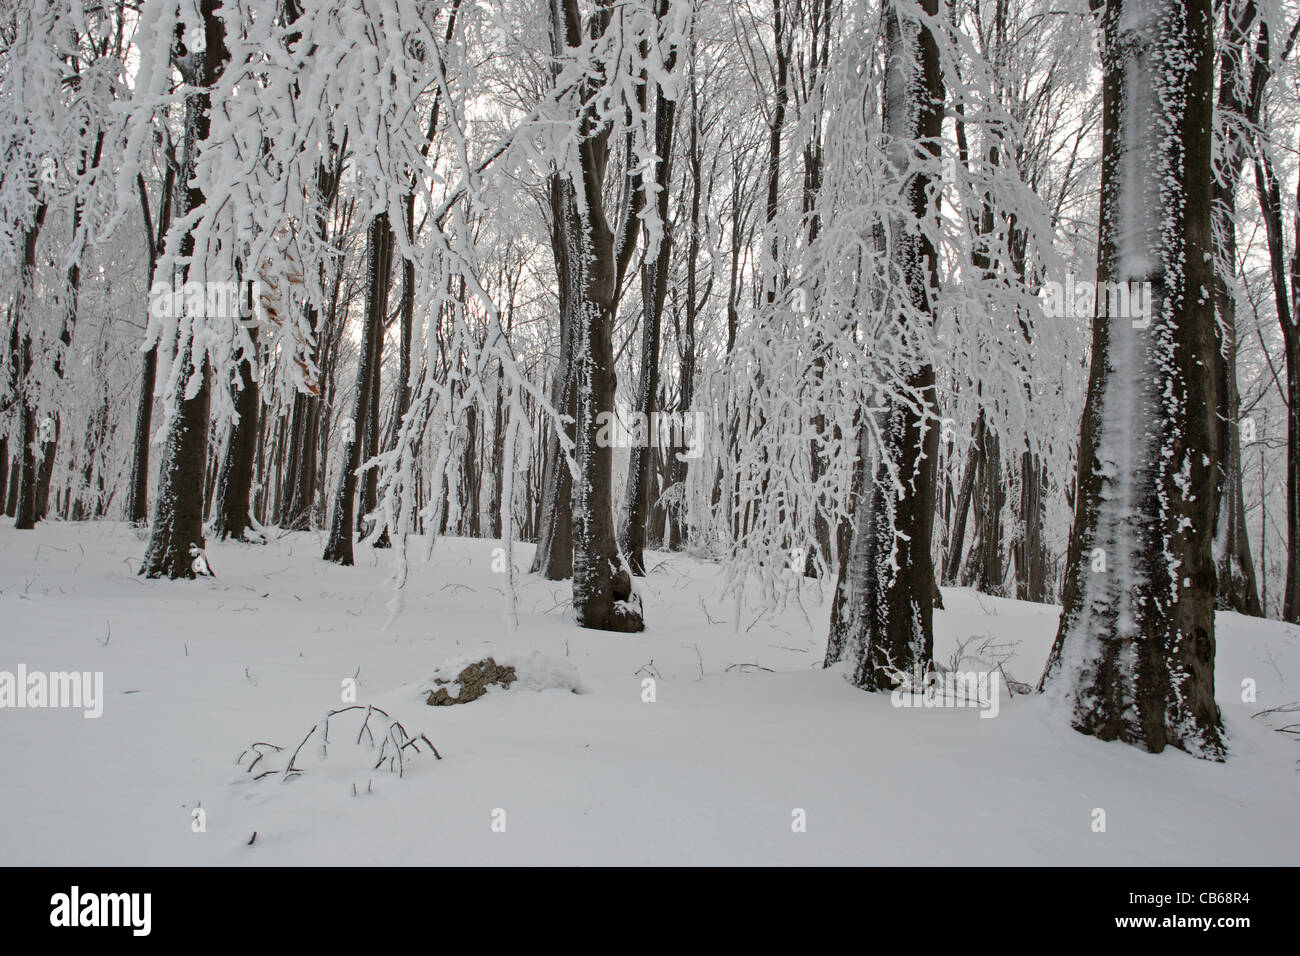 Forest. Winter scenery with trees in snow. Central Balkan National Park. Bulgaria Stock Photo